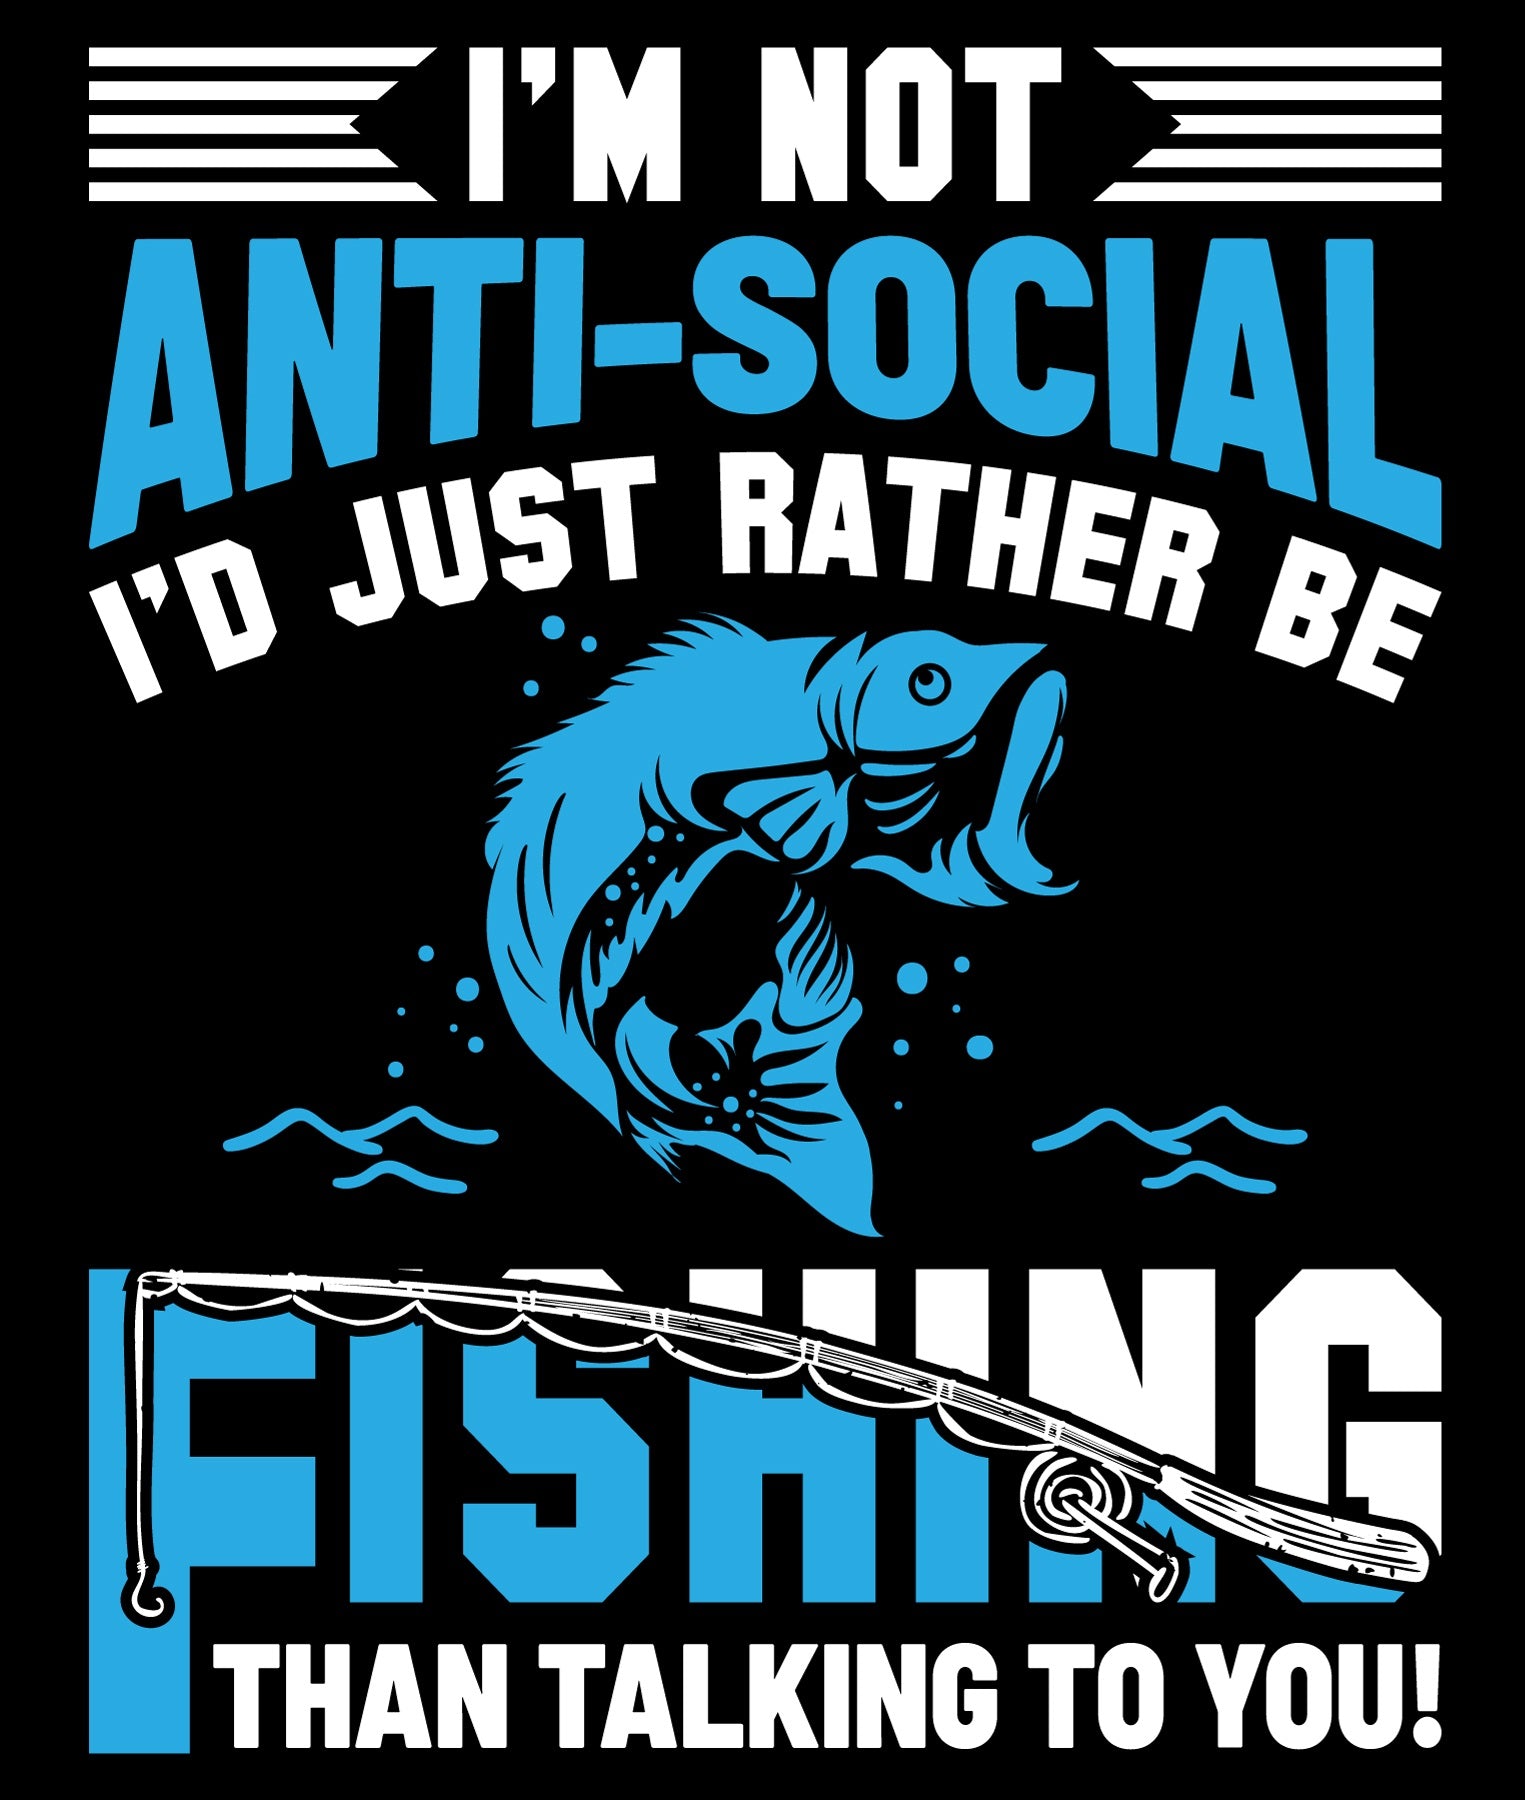 Who Makes the Best Fishing Shirts in Australia? Get On It Apparel - Get On  It Apparel